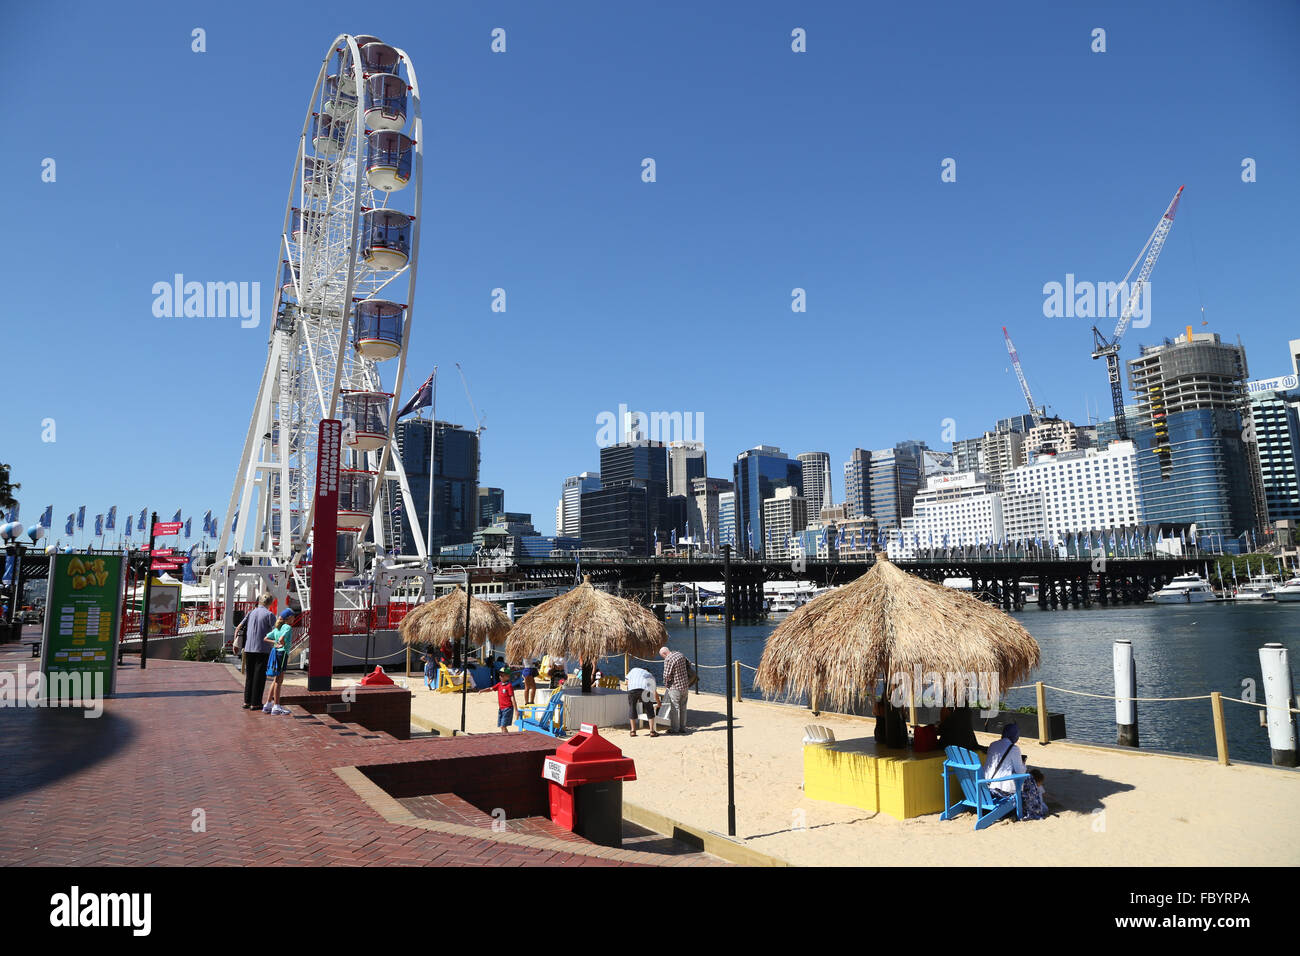 Star of the Show Ferris wheel and a synthetic beach at Darling Harbour, Sydney, Australia. Stock Photo